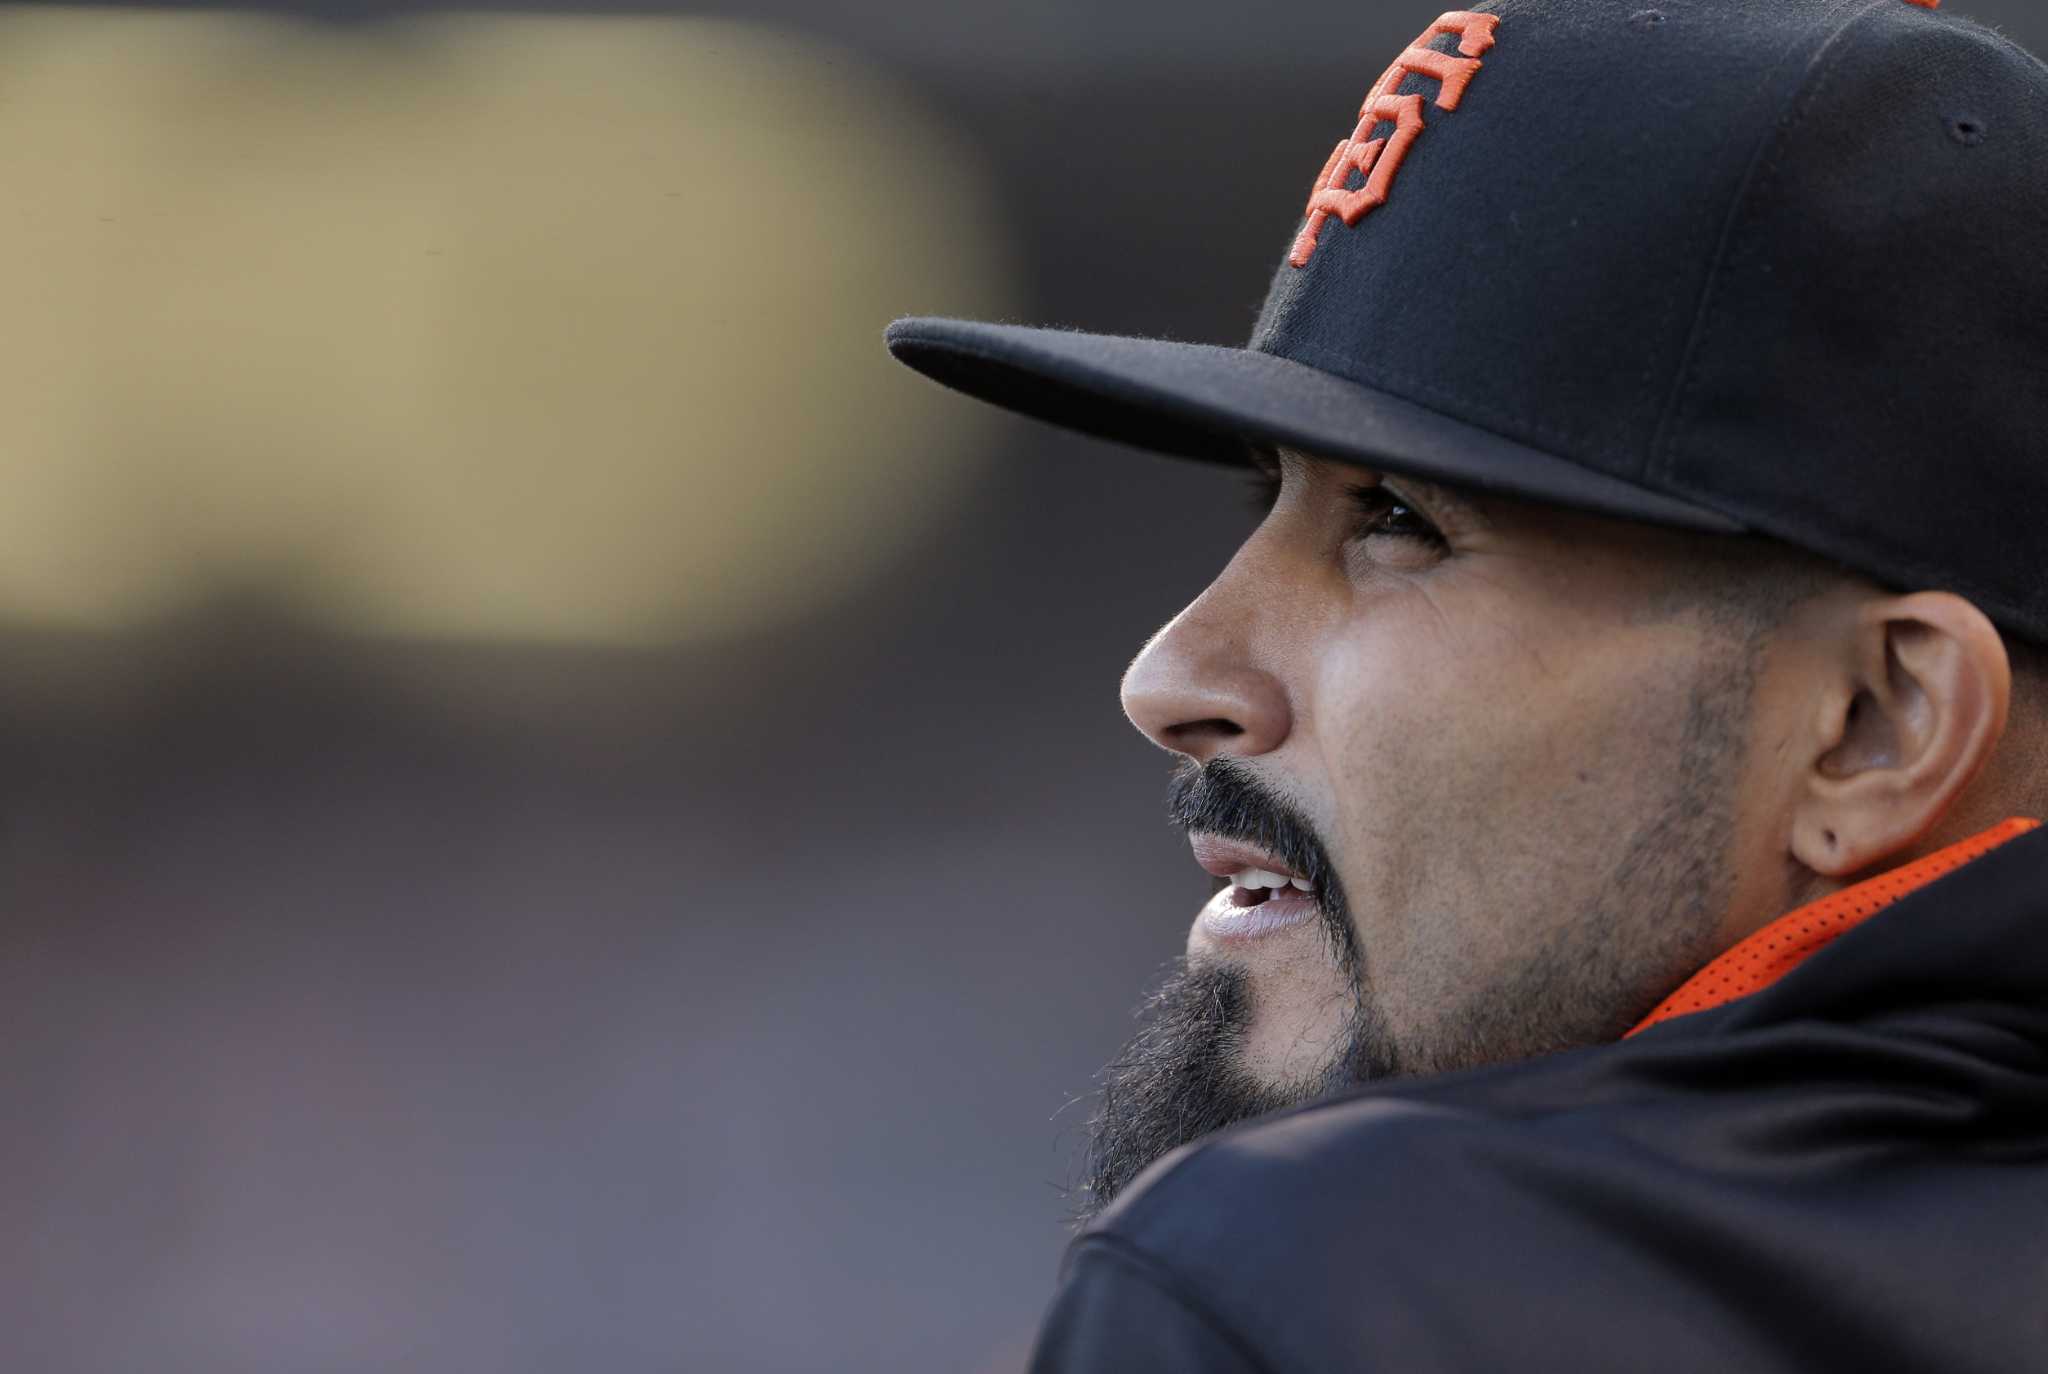 Sergio Romo retires as Giant after pitching one final time - The